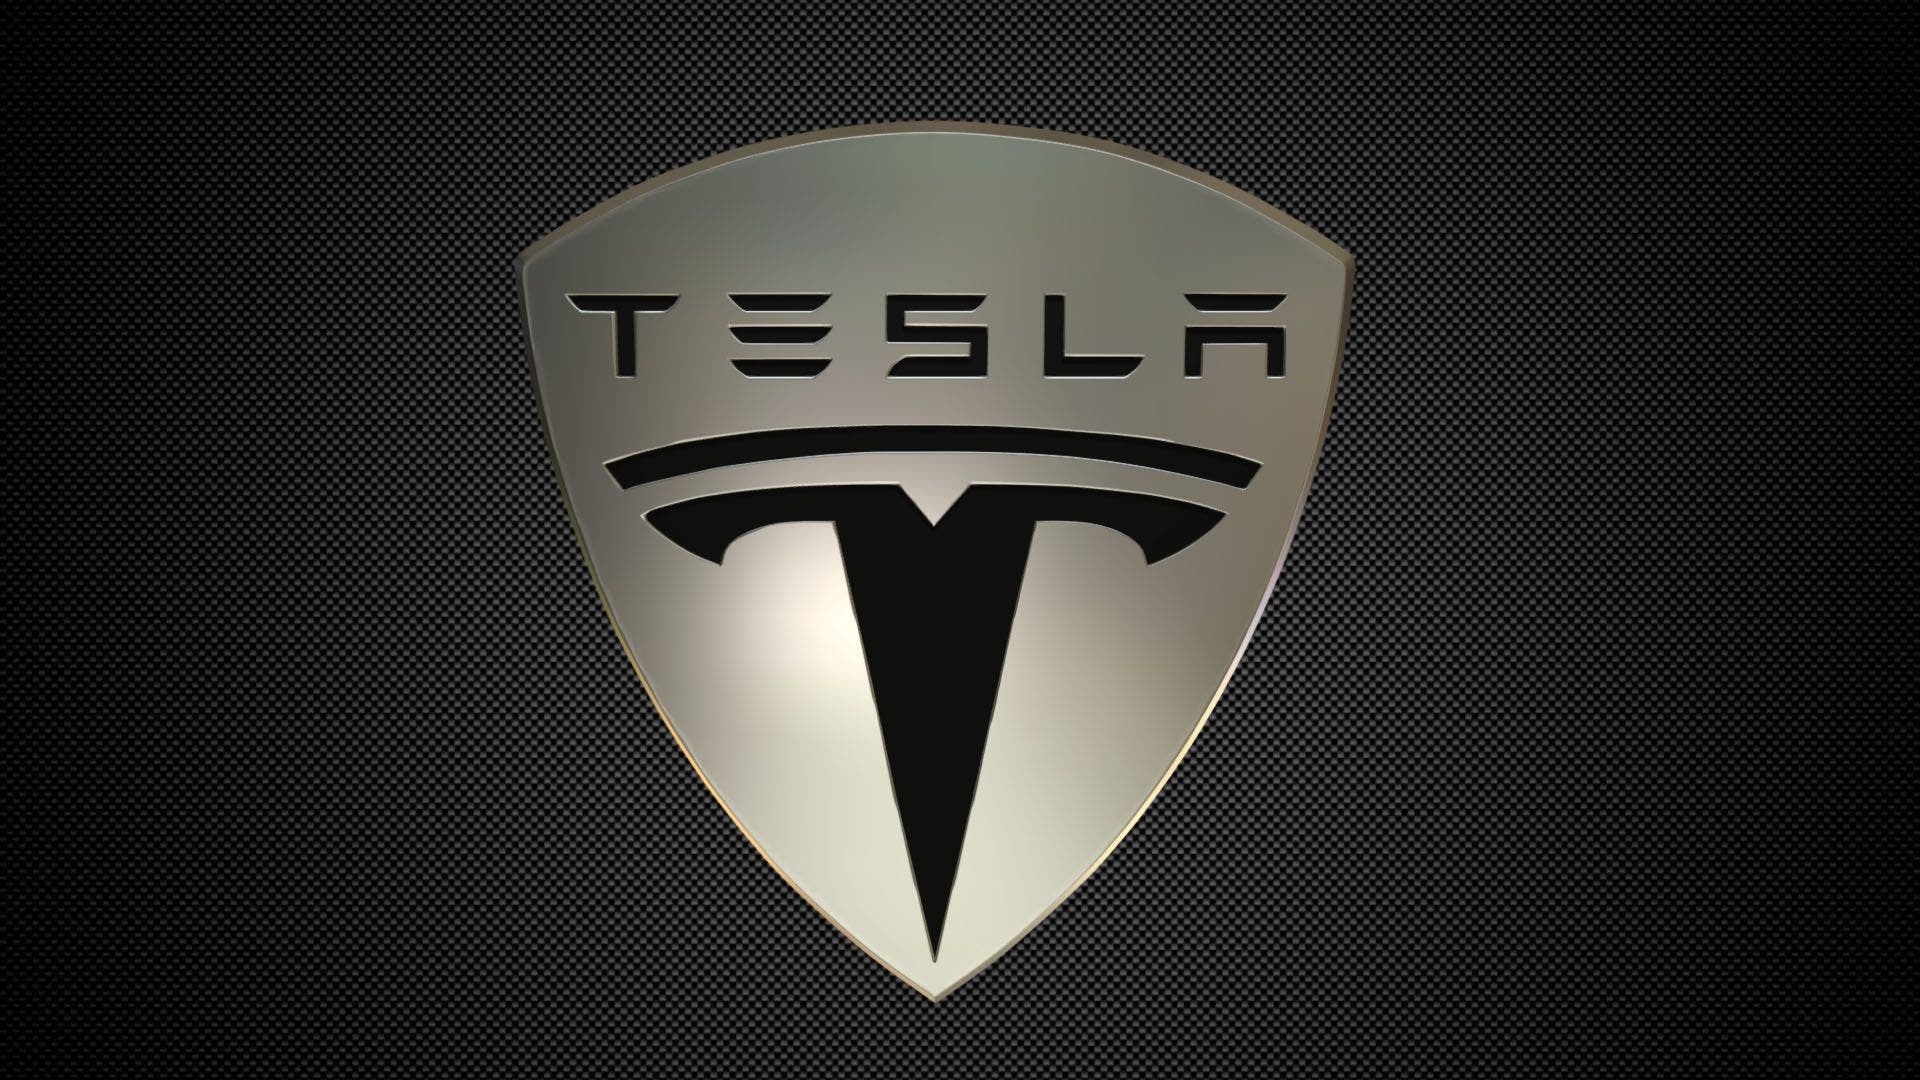 Tesla To $340? Plus This Analyst Slashes PT On MillerKnoll By 60%